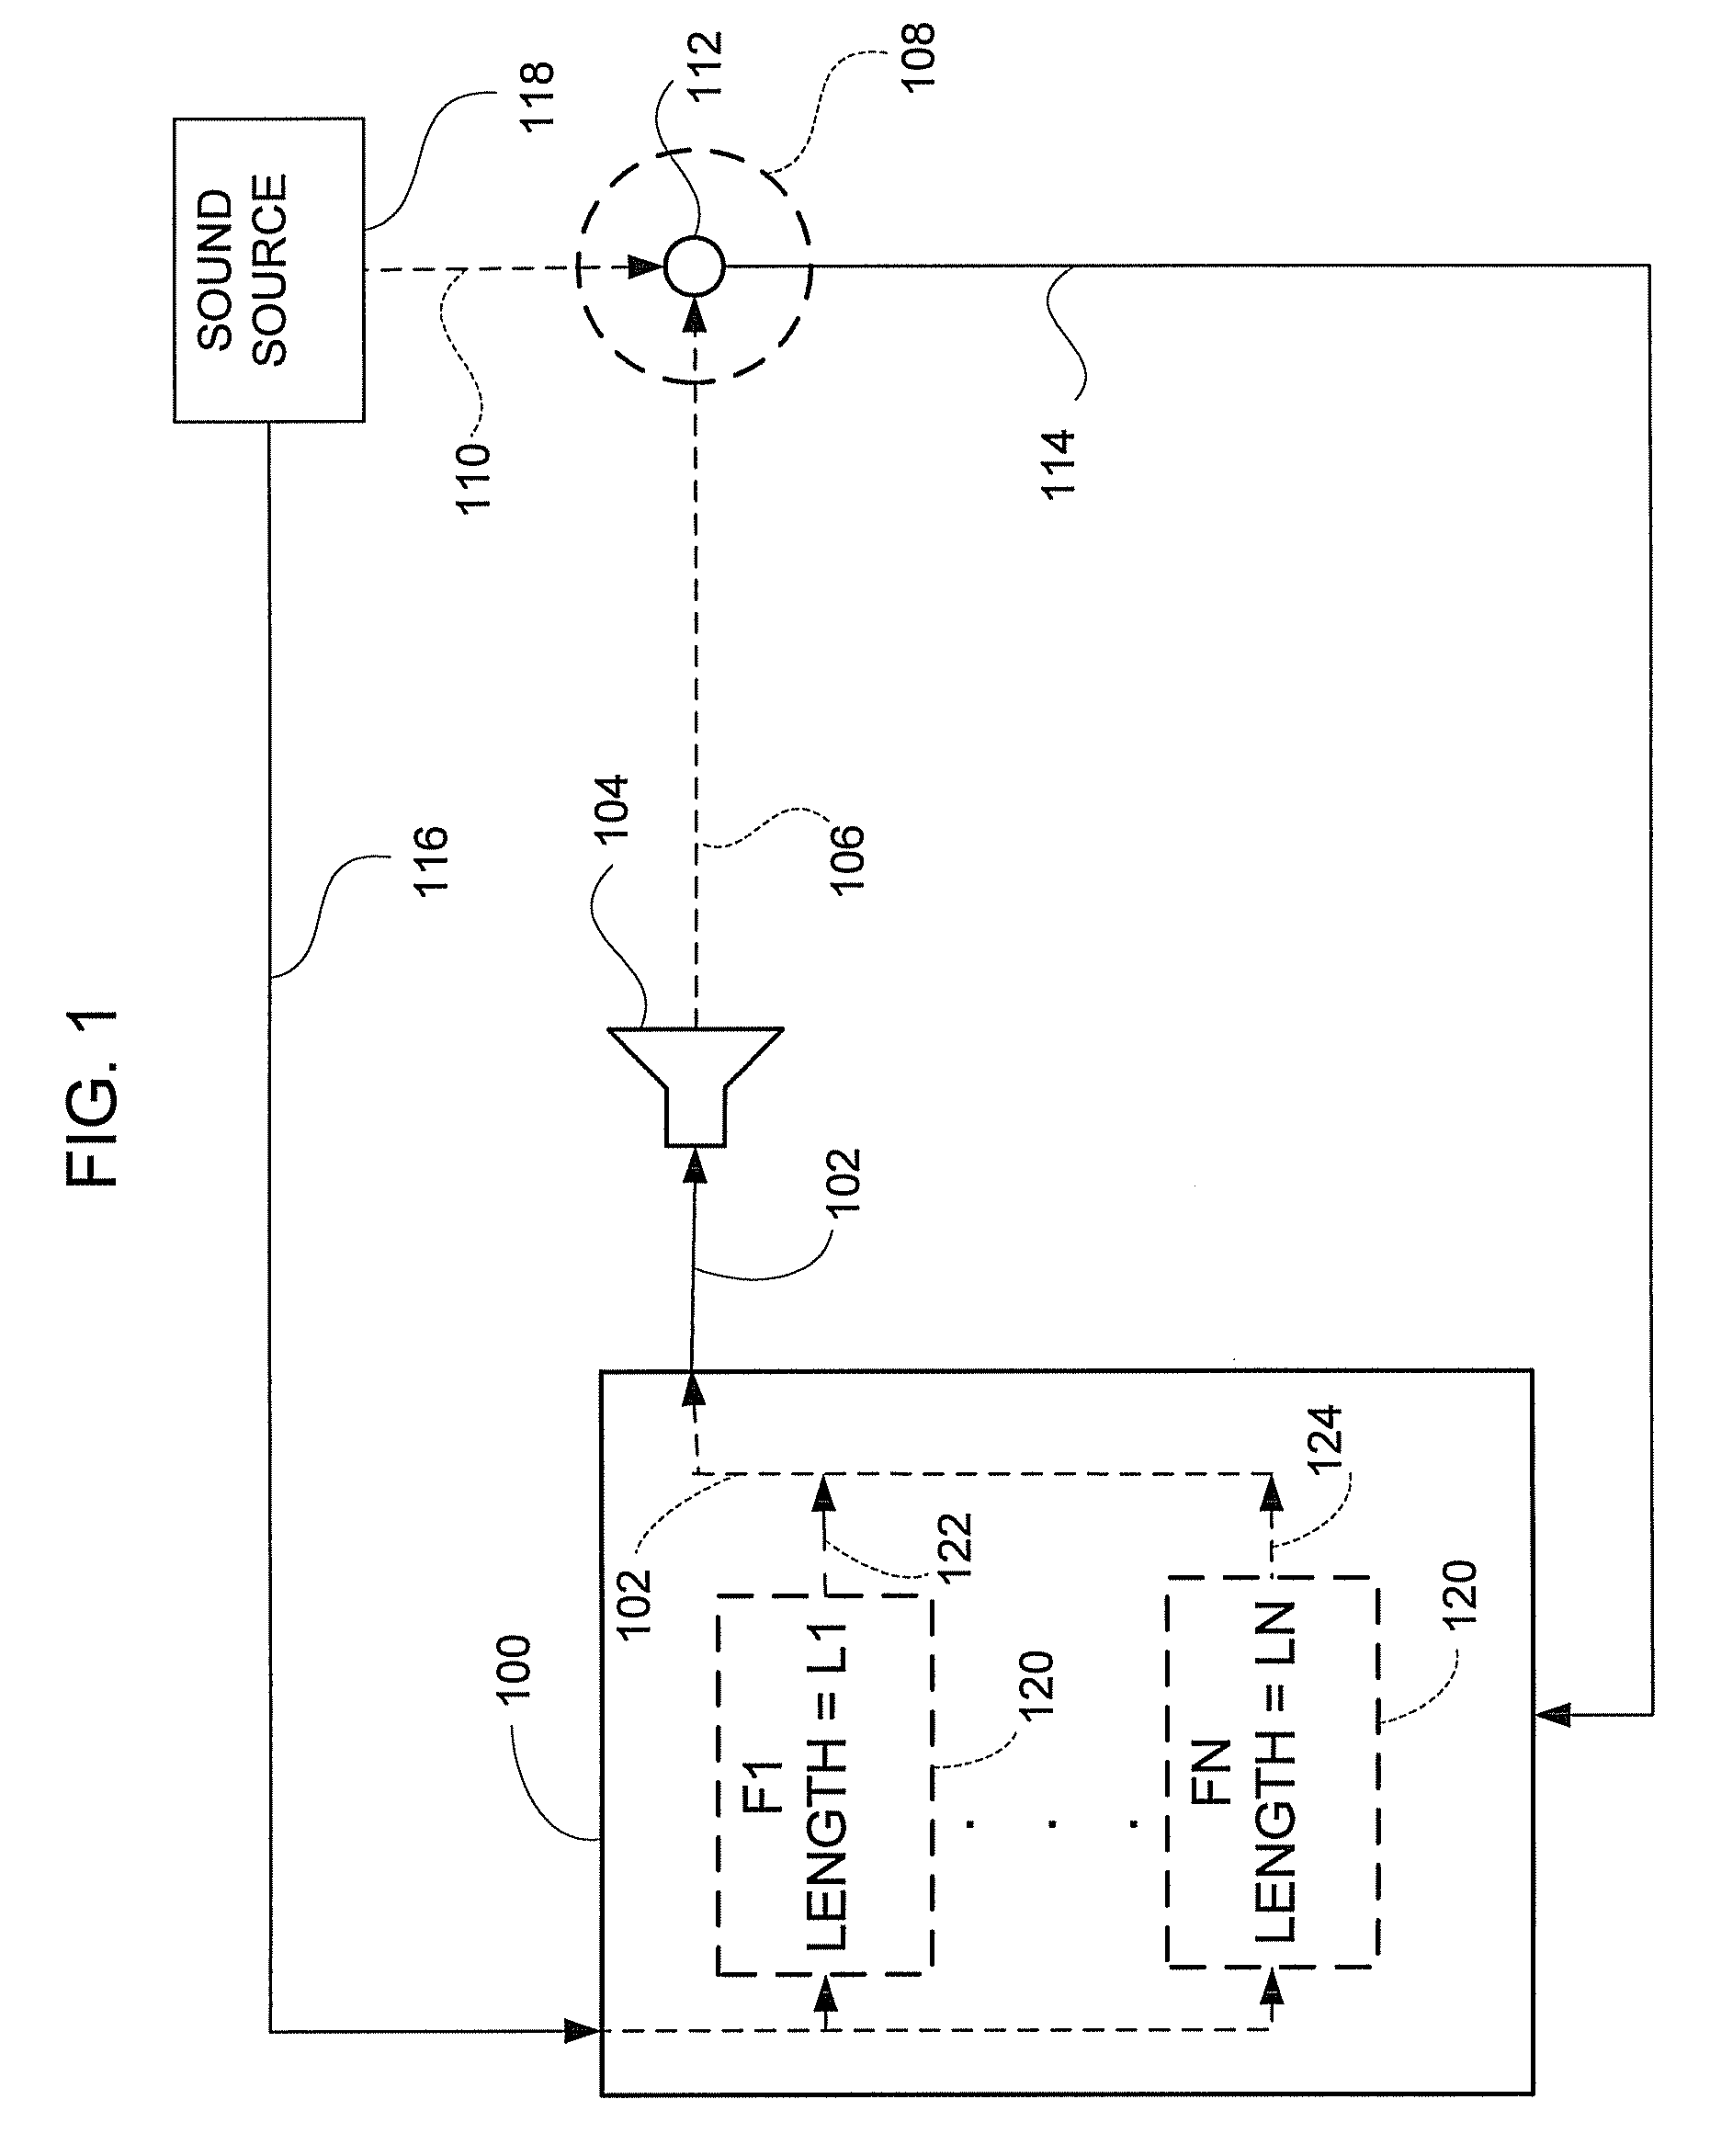 System for active noise control with parallel adaptive filter configuration